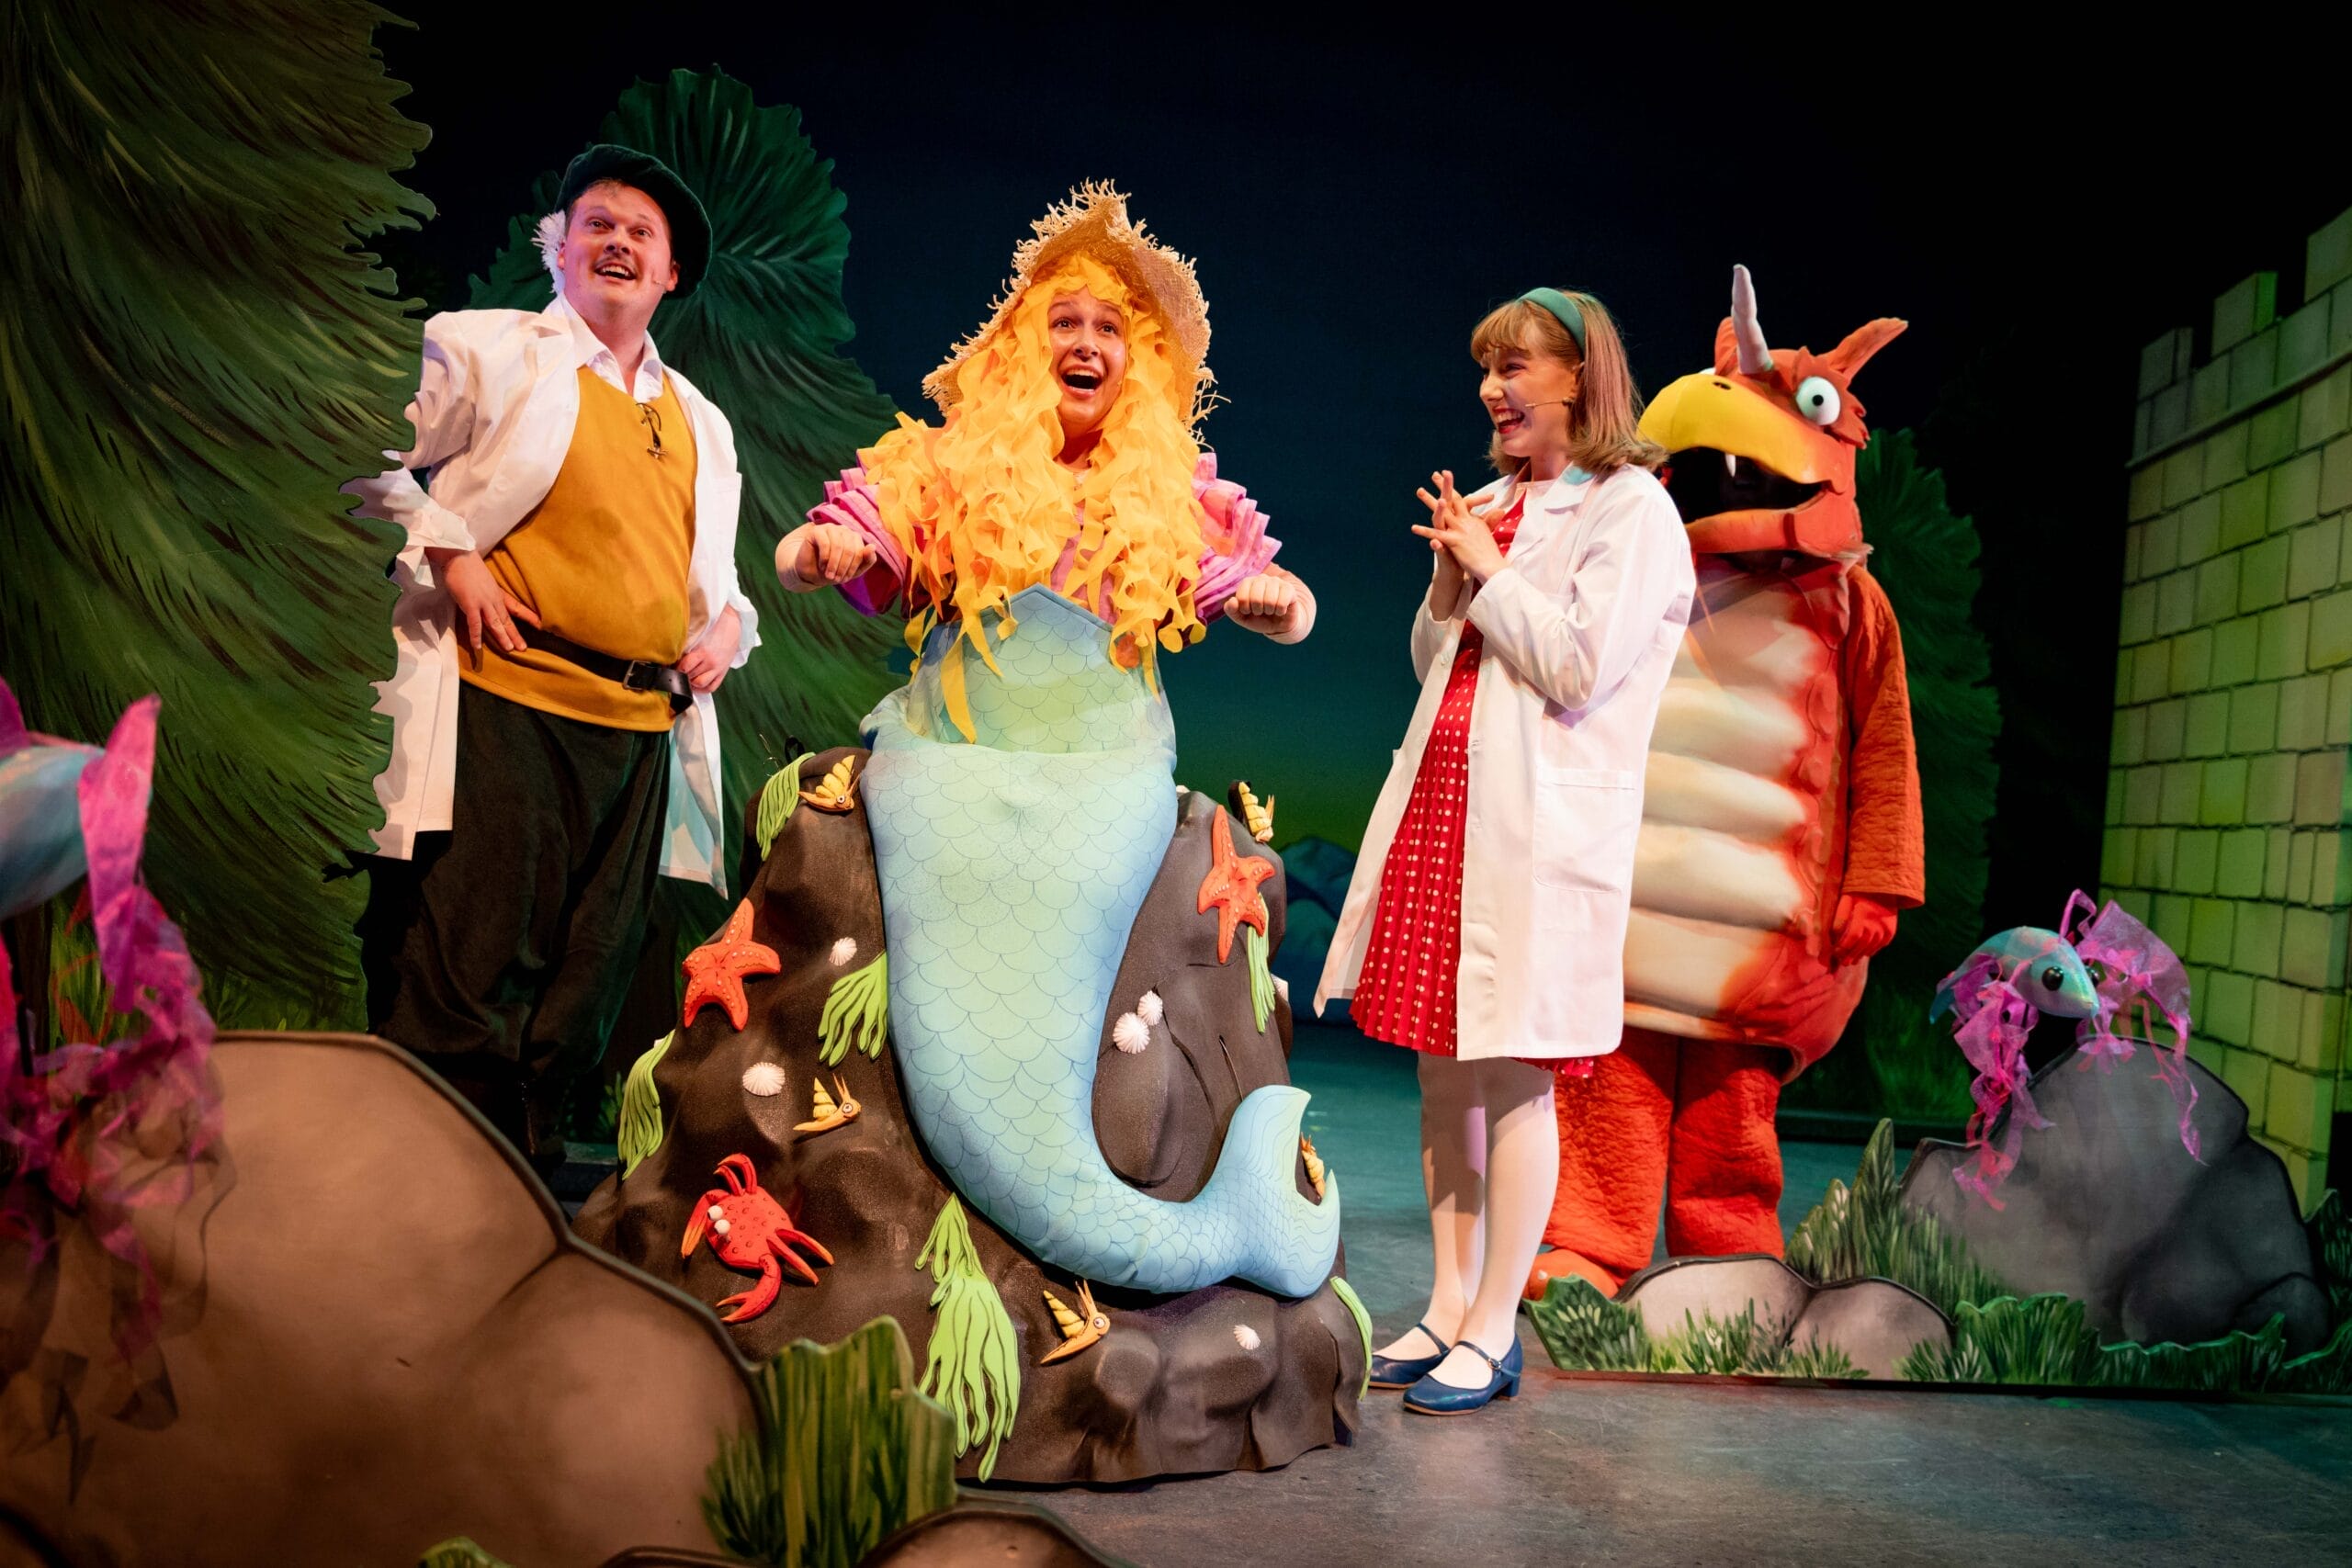 Princess Pearl and Sir Gadabout wearing lab coats stand either side of a mermaid who sits on a rock and has long blond hair and a green tail. Zog the orange dragon can be seen at the back of the stage.